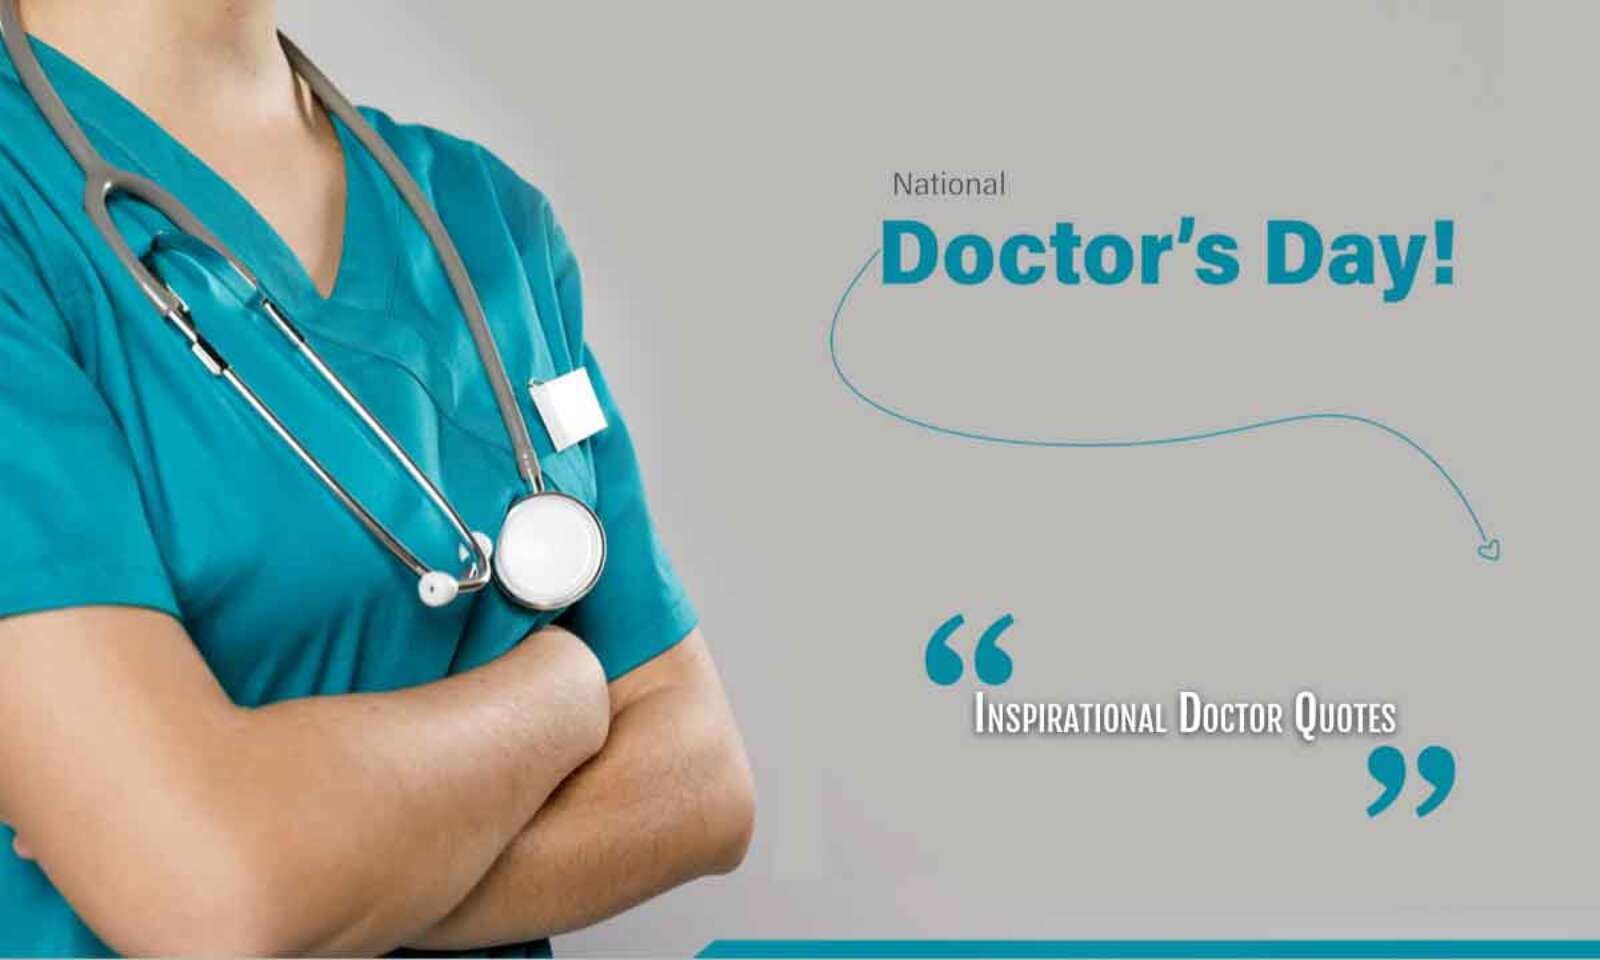 Incredible Compilation of Doctor Quotes Images – Extensive Collection of 999+ Doctor Quotes Images in Full 4K Quality